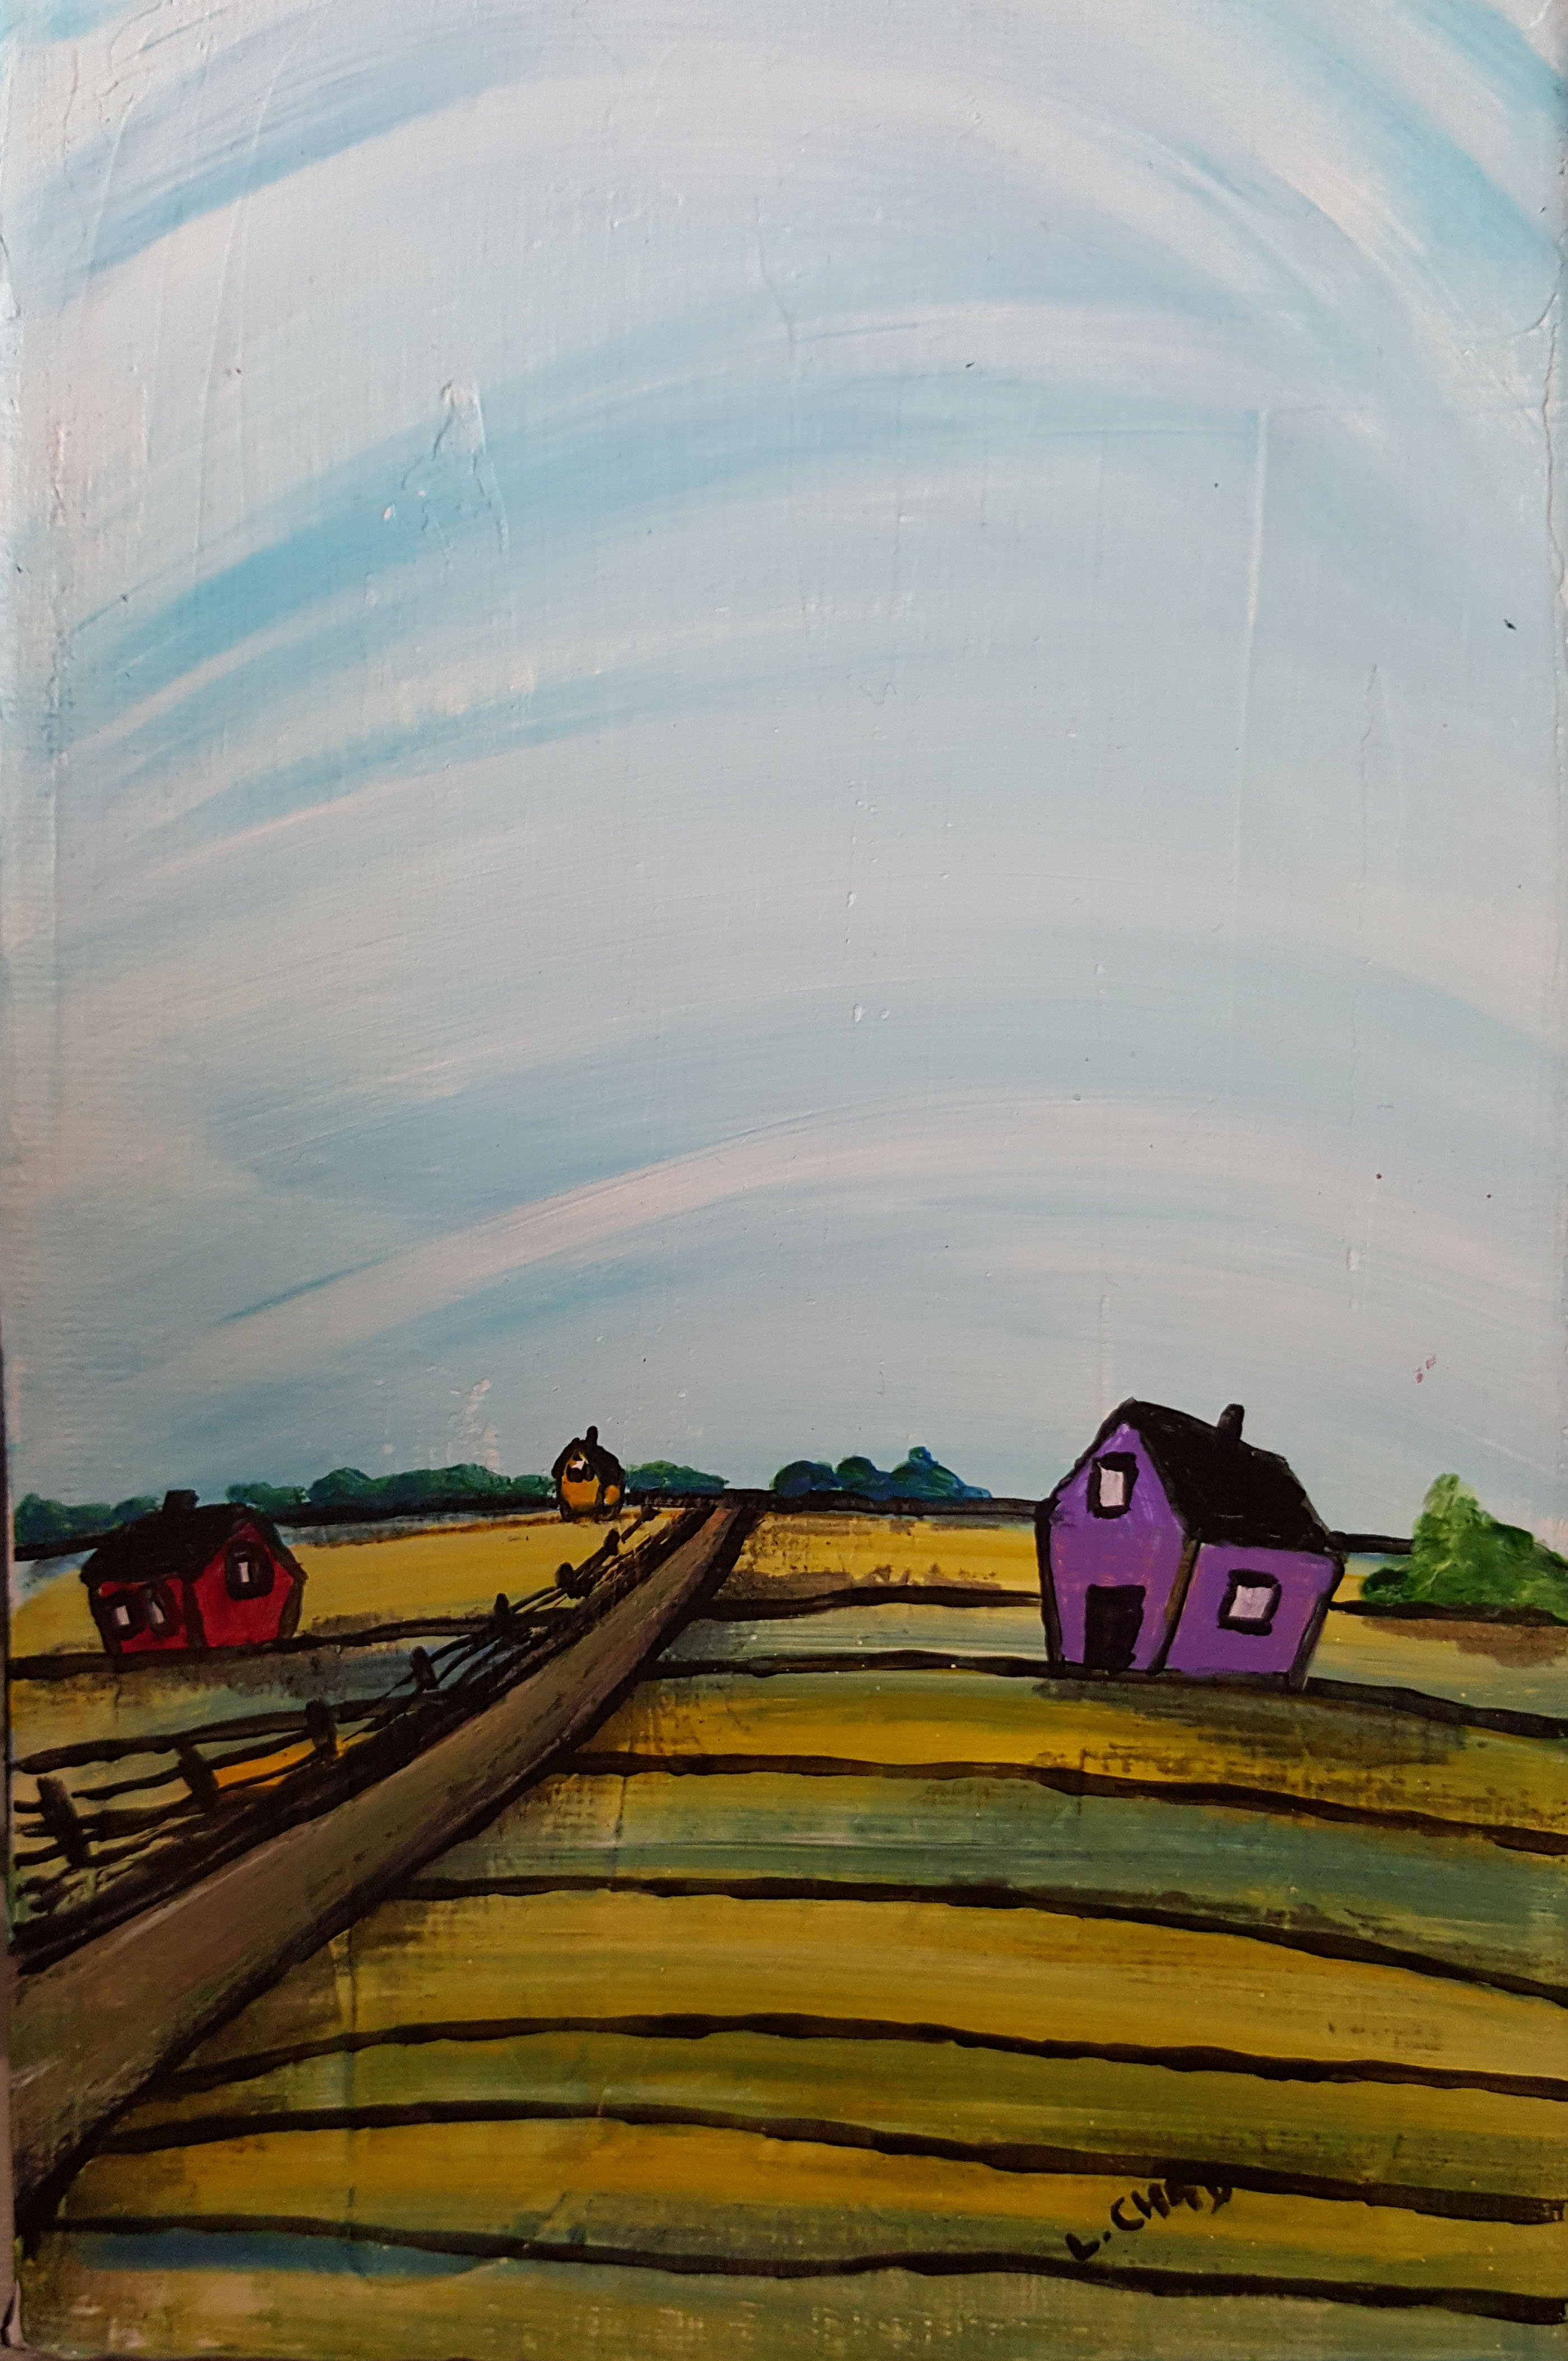 "Take Me Home" [2015]
Mixed media on canvas. 7" x 4.75" (unframed with easel)
SOLD